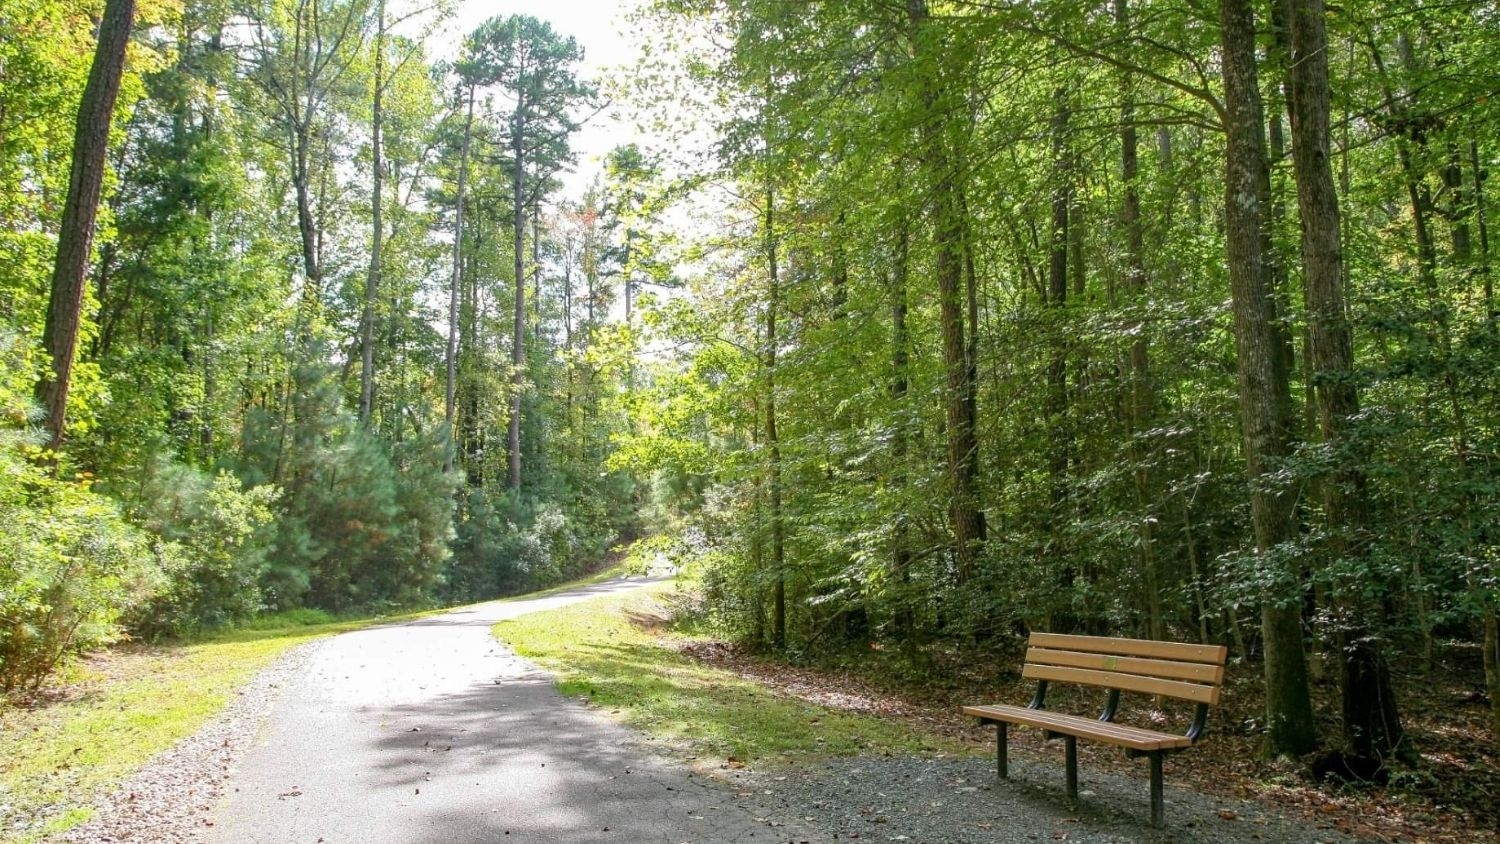 A park in Raleigh, North Carolina - Study Raises Questions About Access to Urban Parks During the Pandemic - Parks, Recreation and Tourism Management at NC State University